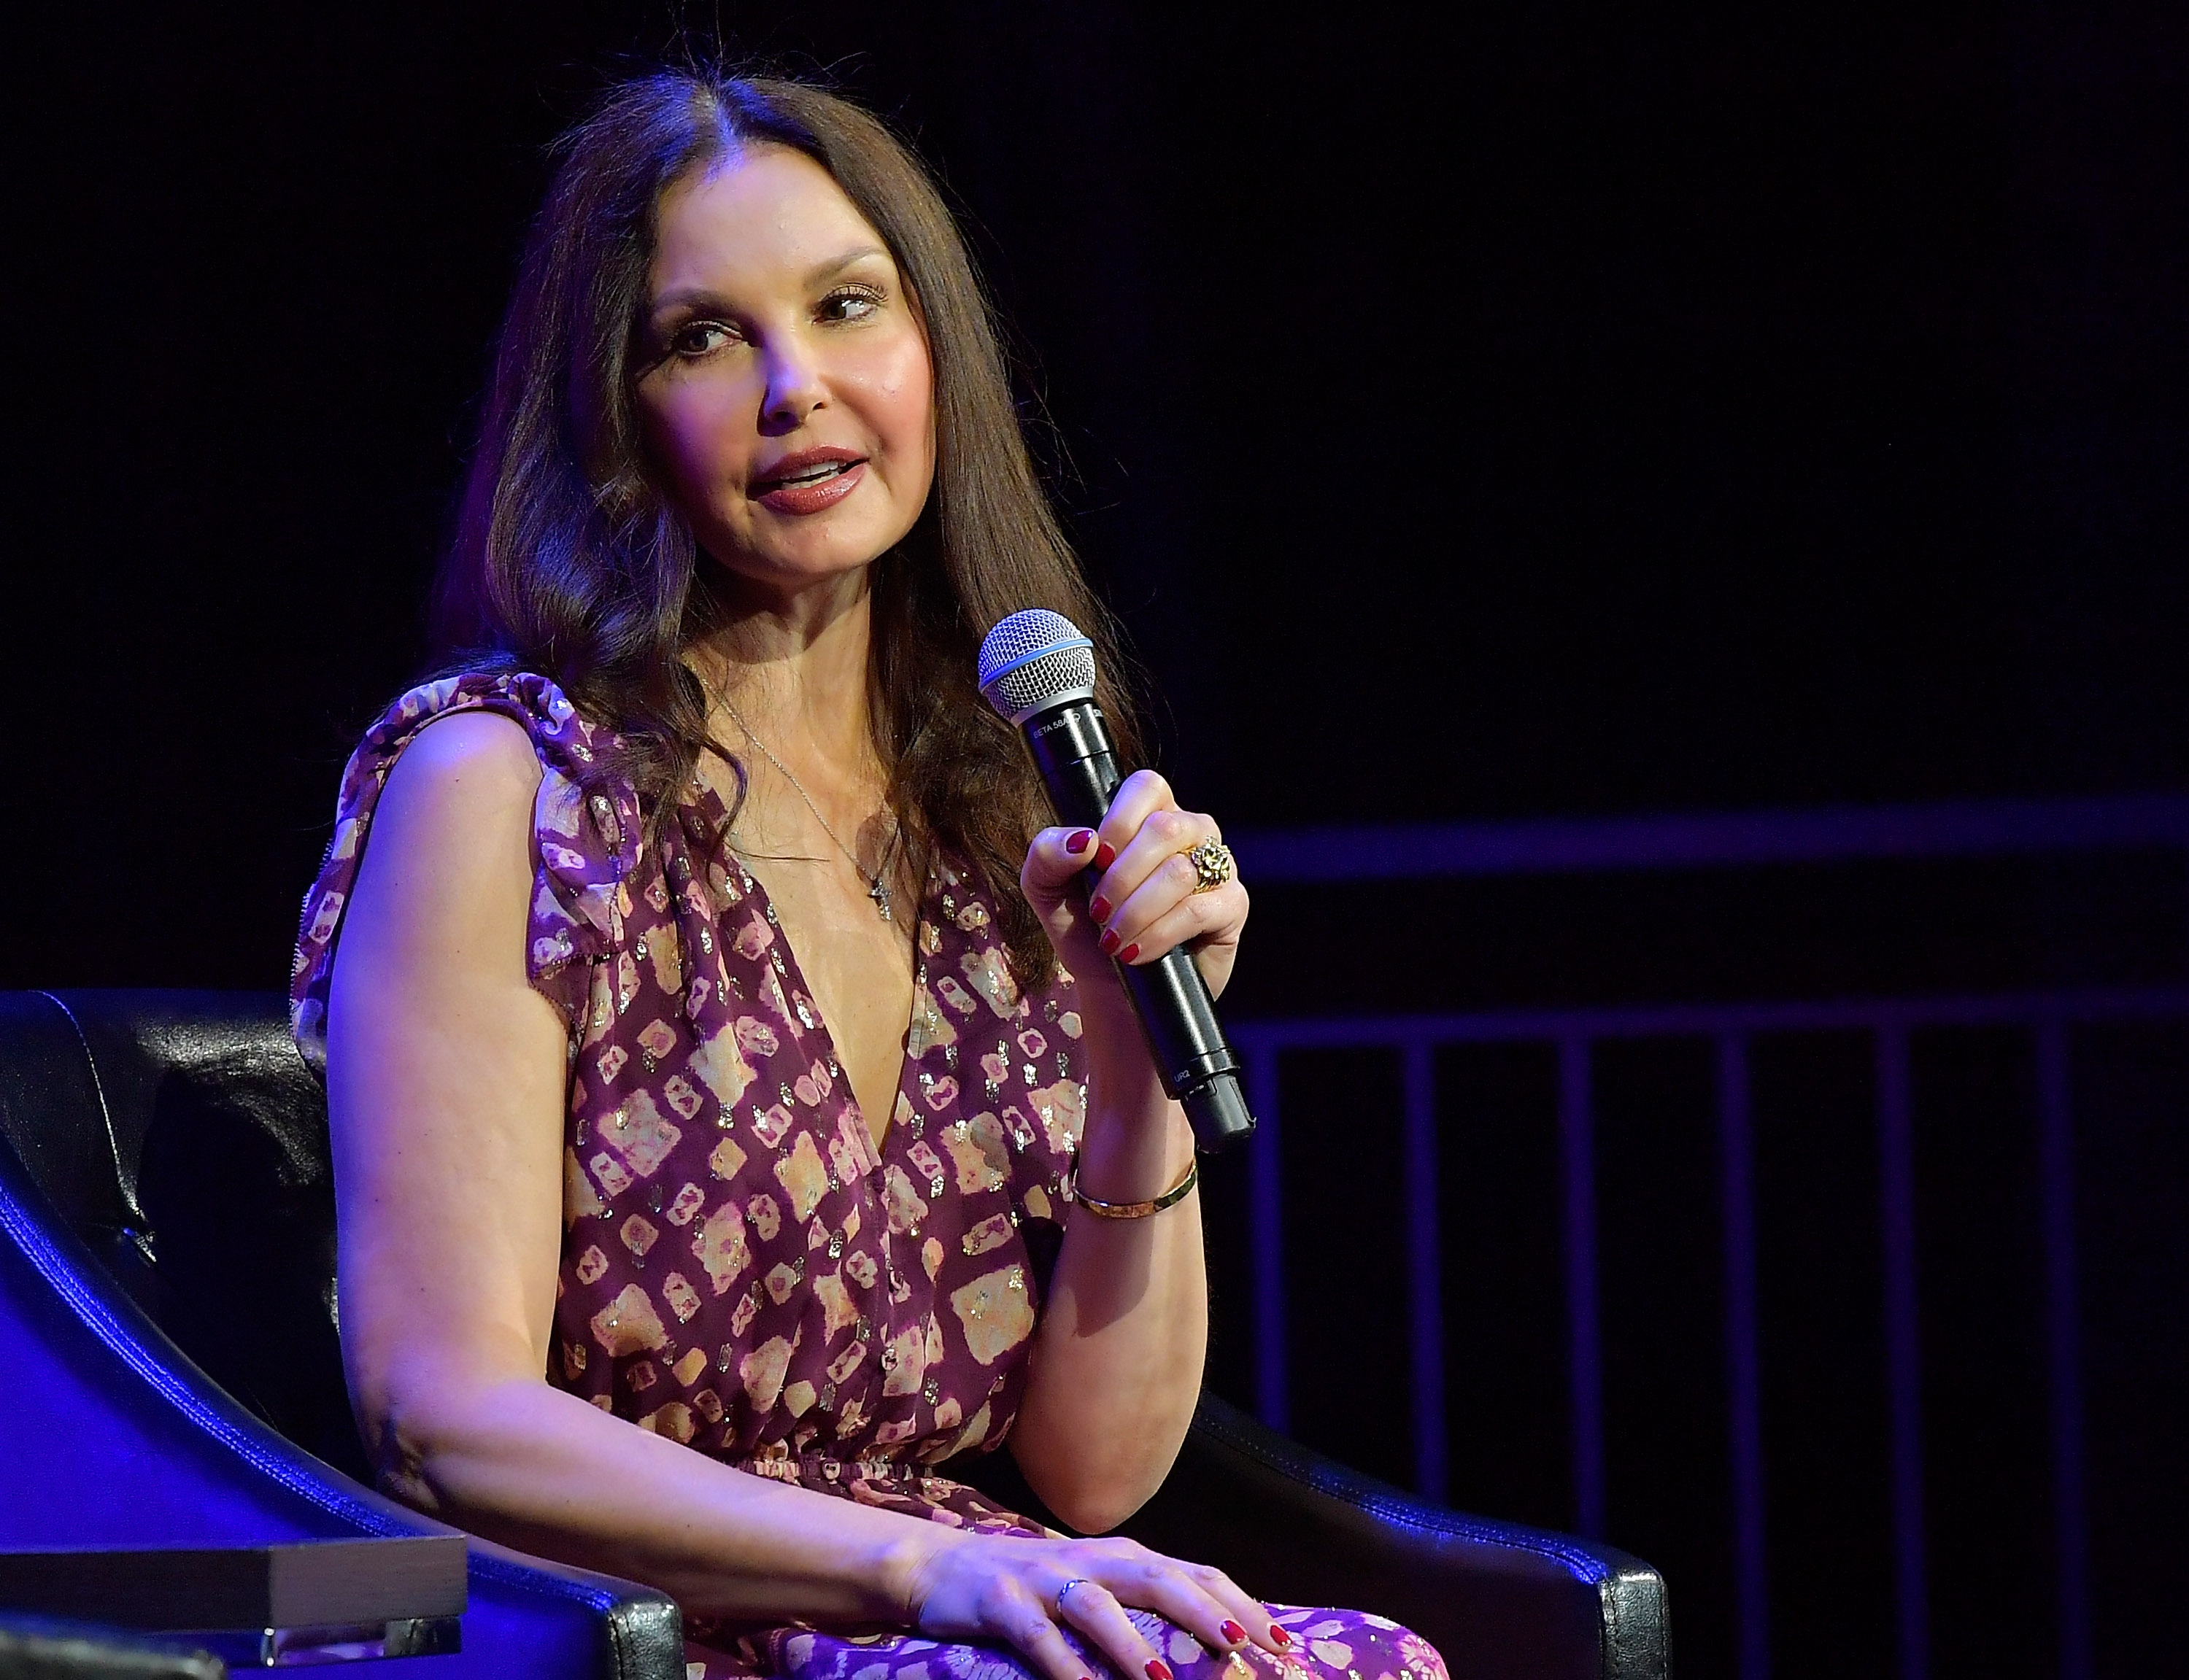 Ashley Judd speaks onstage at "Time's Up" during the 2018 Tribeca Film Festival at Spring Studios on April 28, 2018 in New York City. (Roy Rochlin&mdash;Getty Images for Tribeca Film Festival)